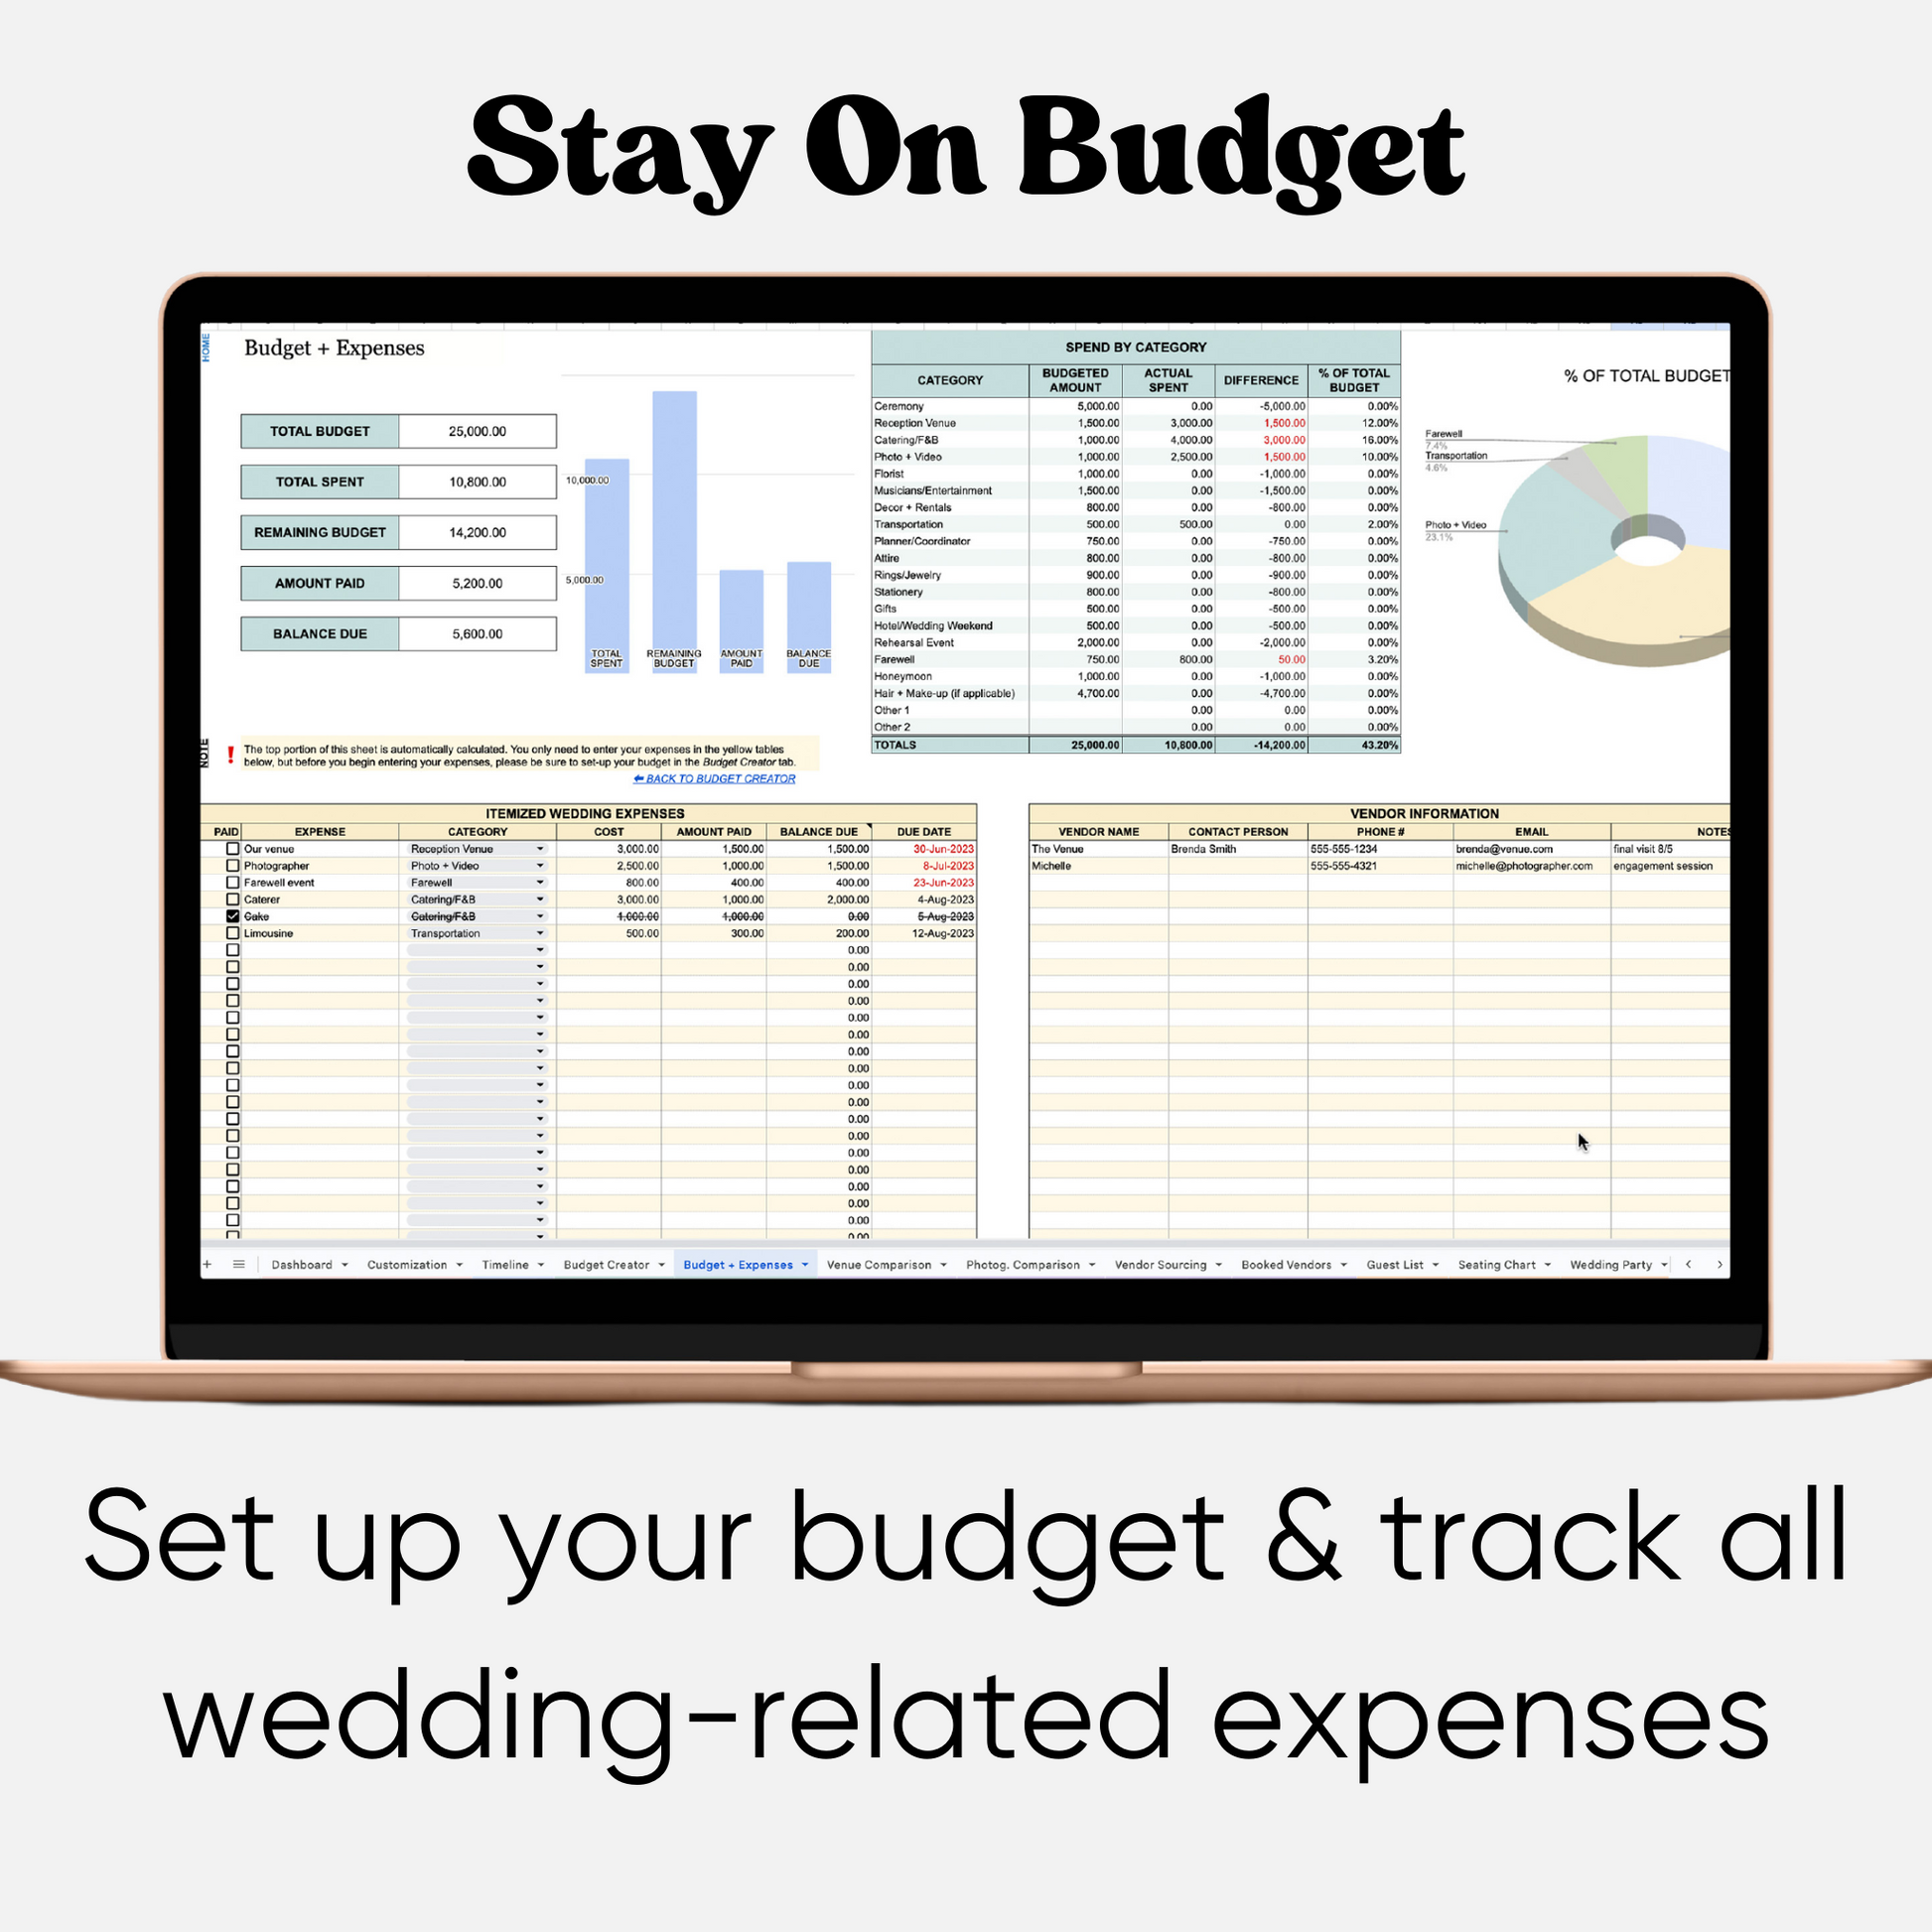 Close-up view of the Wedding Planner template's budgeting section, showcasing a gender-neutral spreadsheet with customizable categories for wedding expenses. The template provides an inclusive and organized budgeting solution.